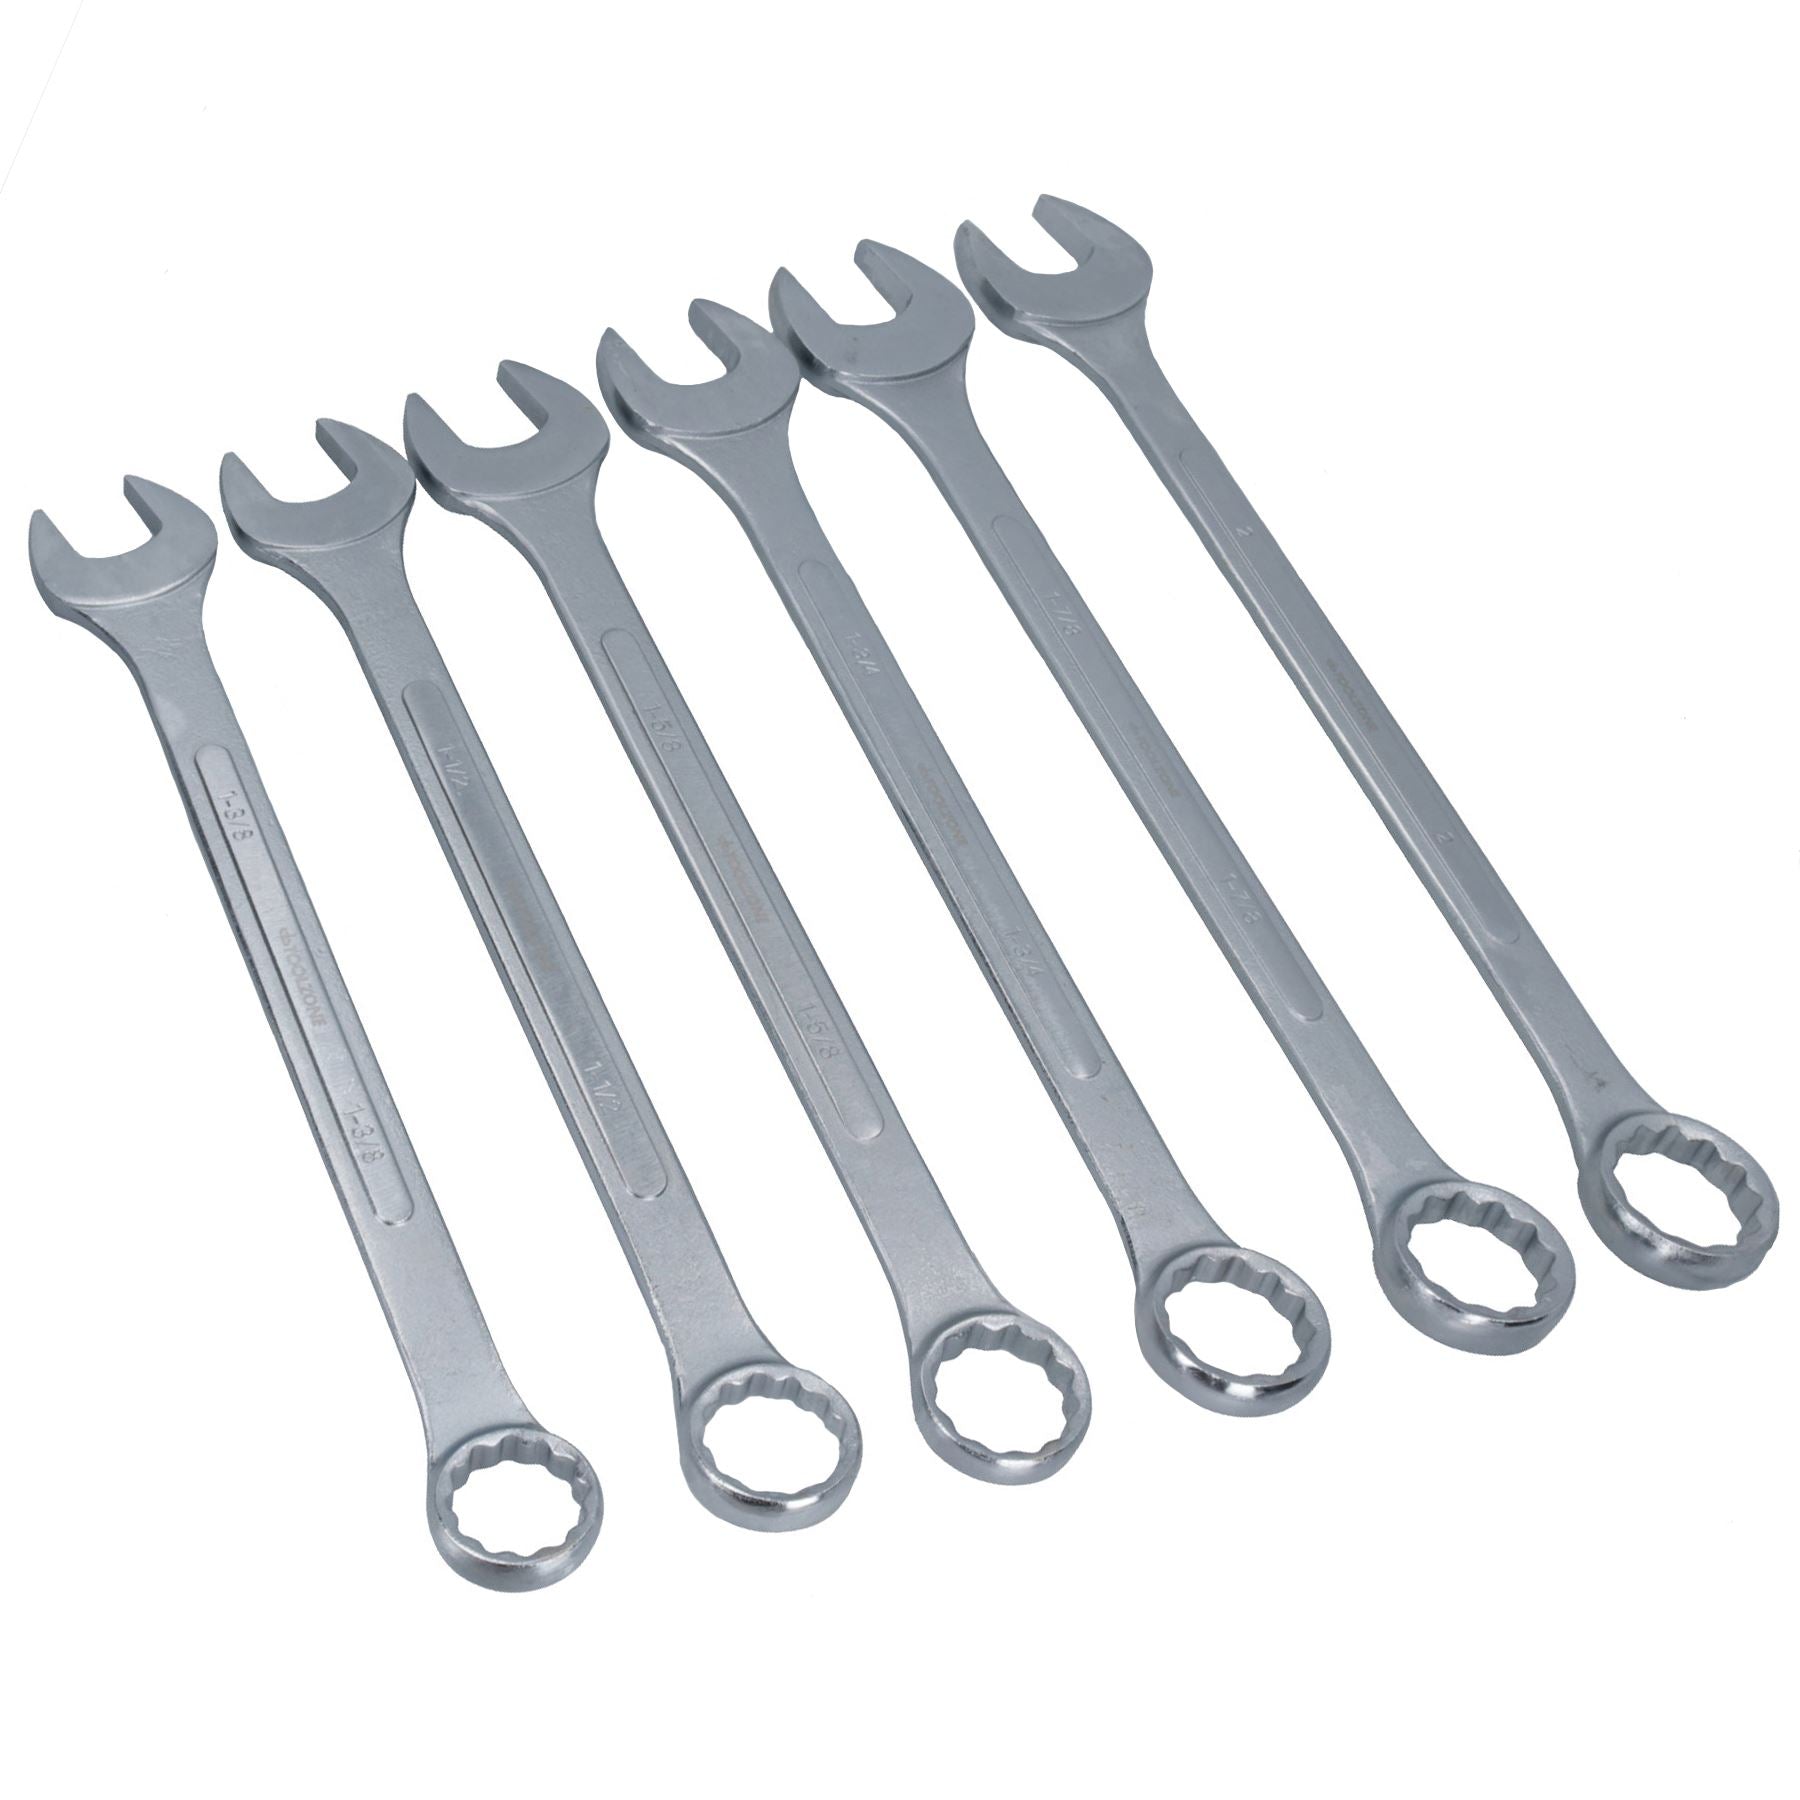 AF Combination Spanners